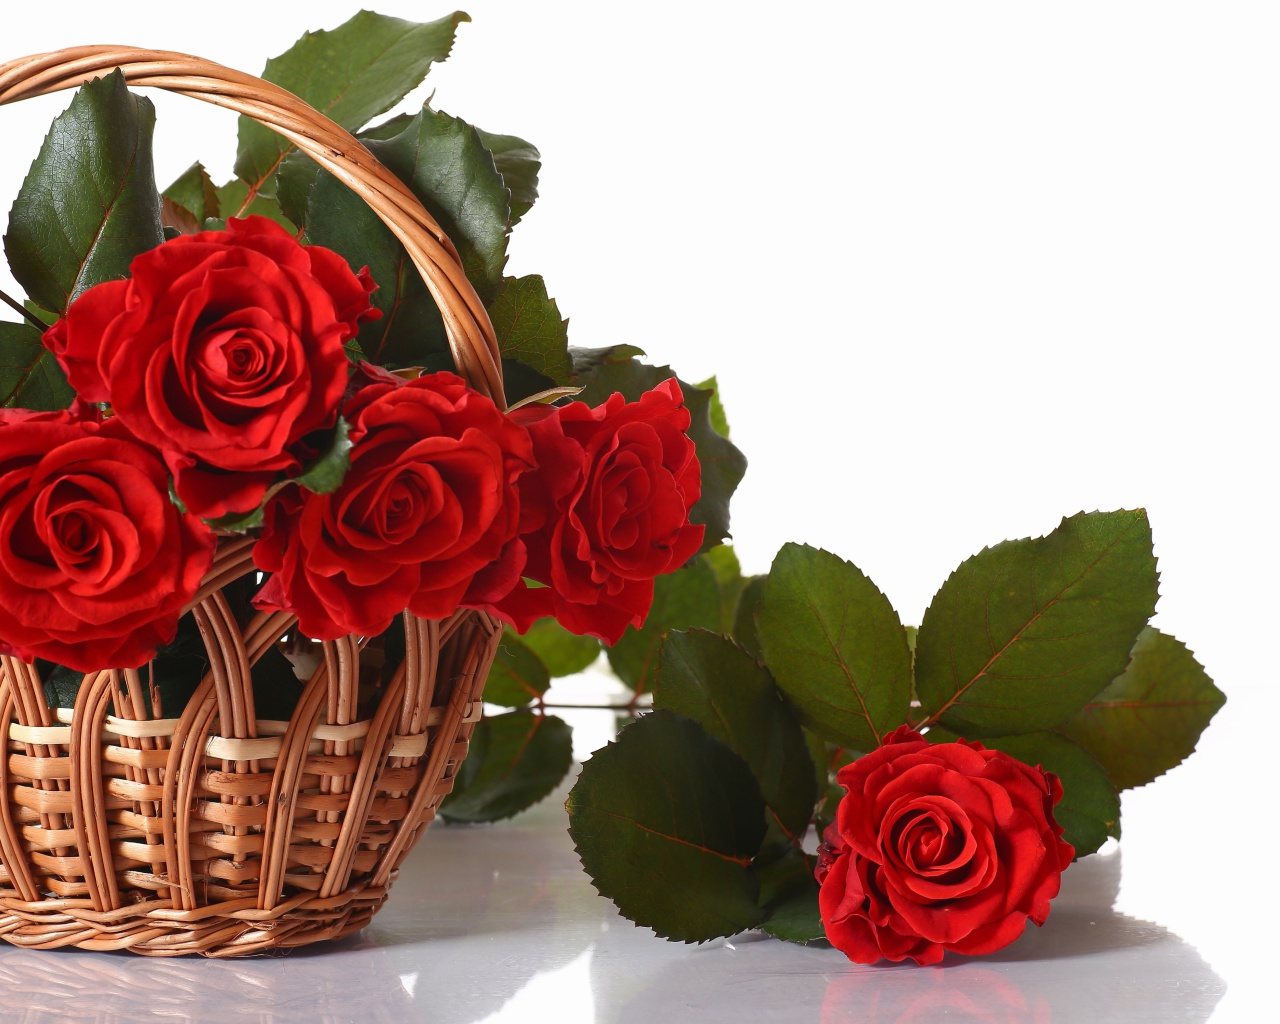 Basket with Roses wallpaper 1280x1024